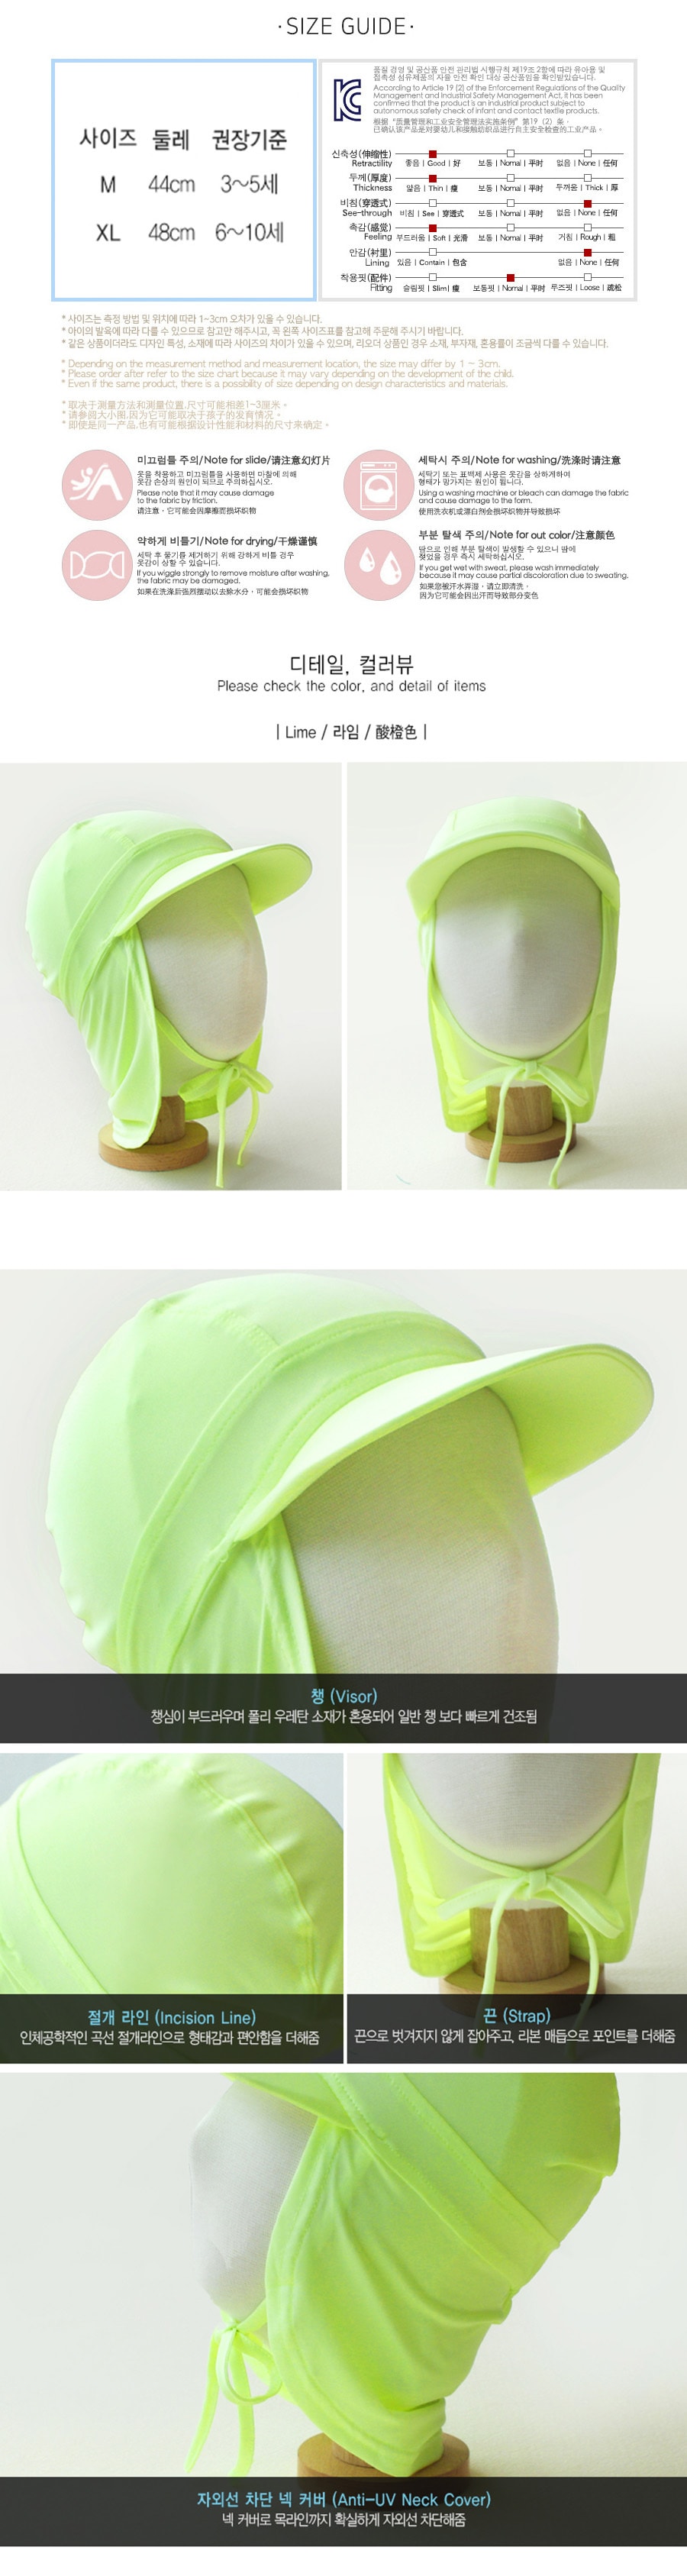 Toddler Kid Girl Flap Sun Protection Hat #Lime M(3-5years)